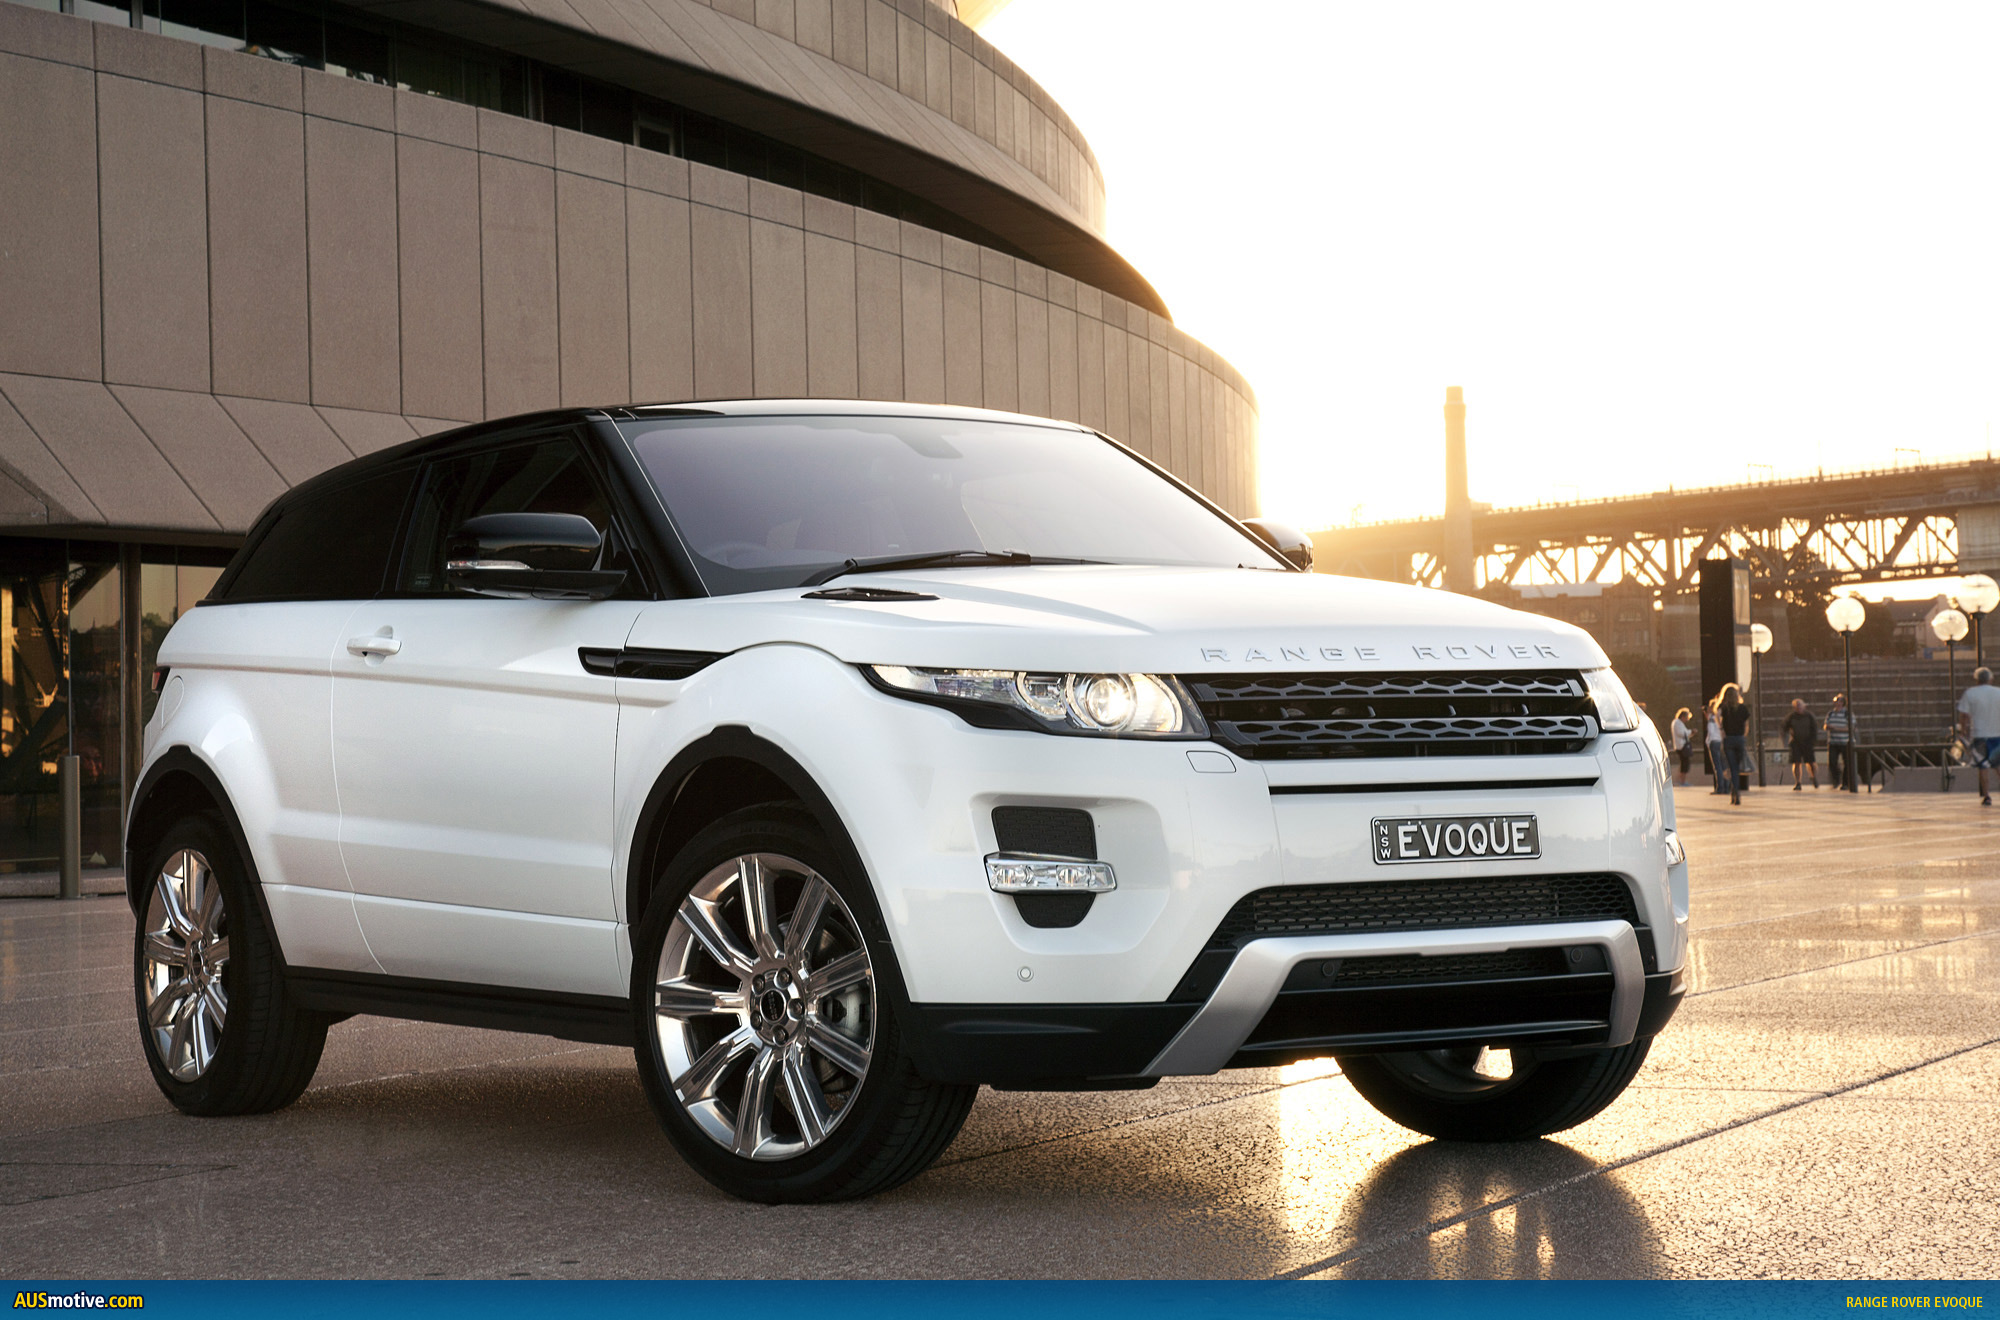 Land Rover Range Rover Evoque 2.2 TD4 2WD AT Pure